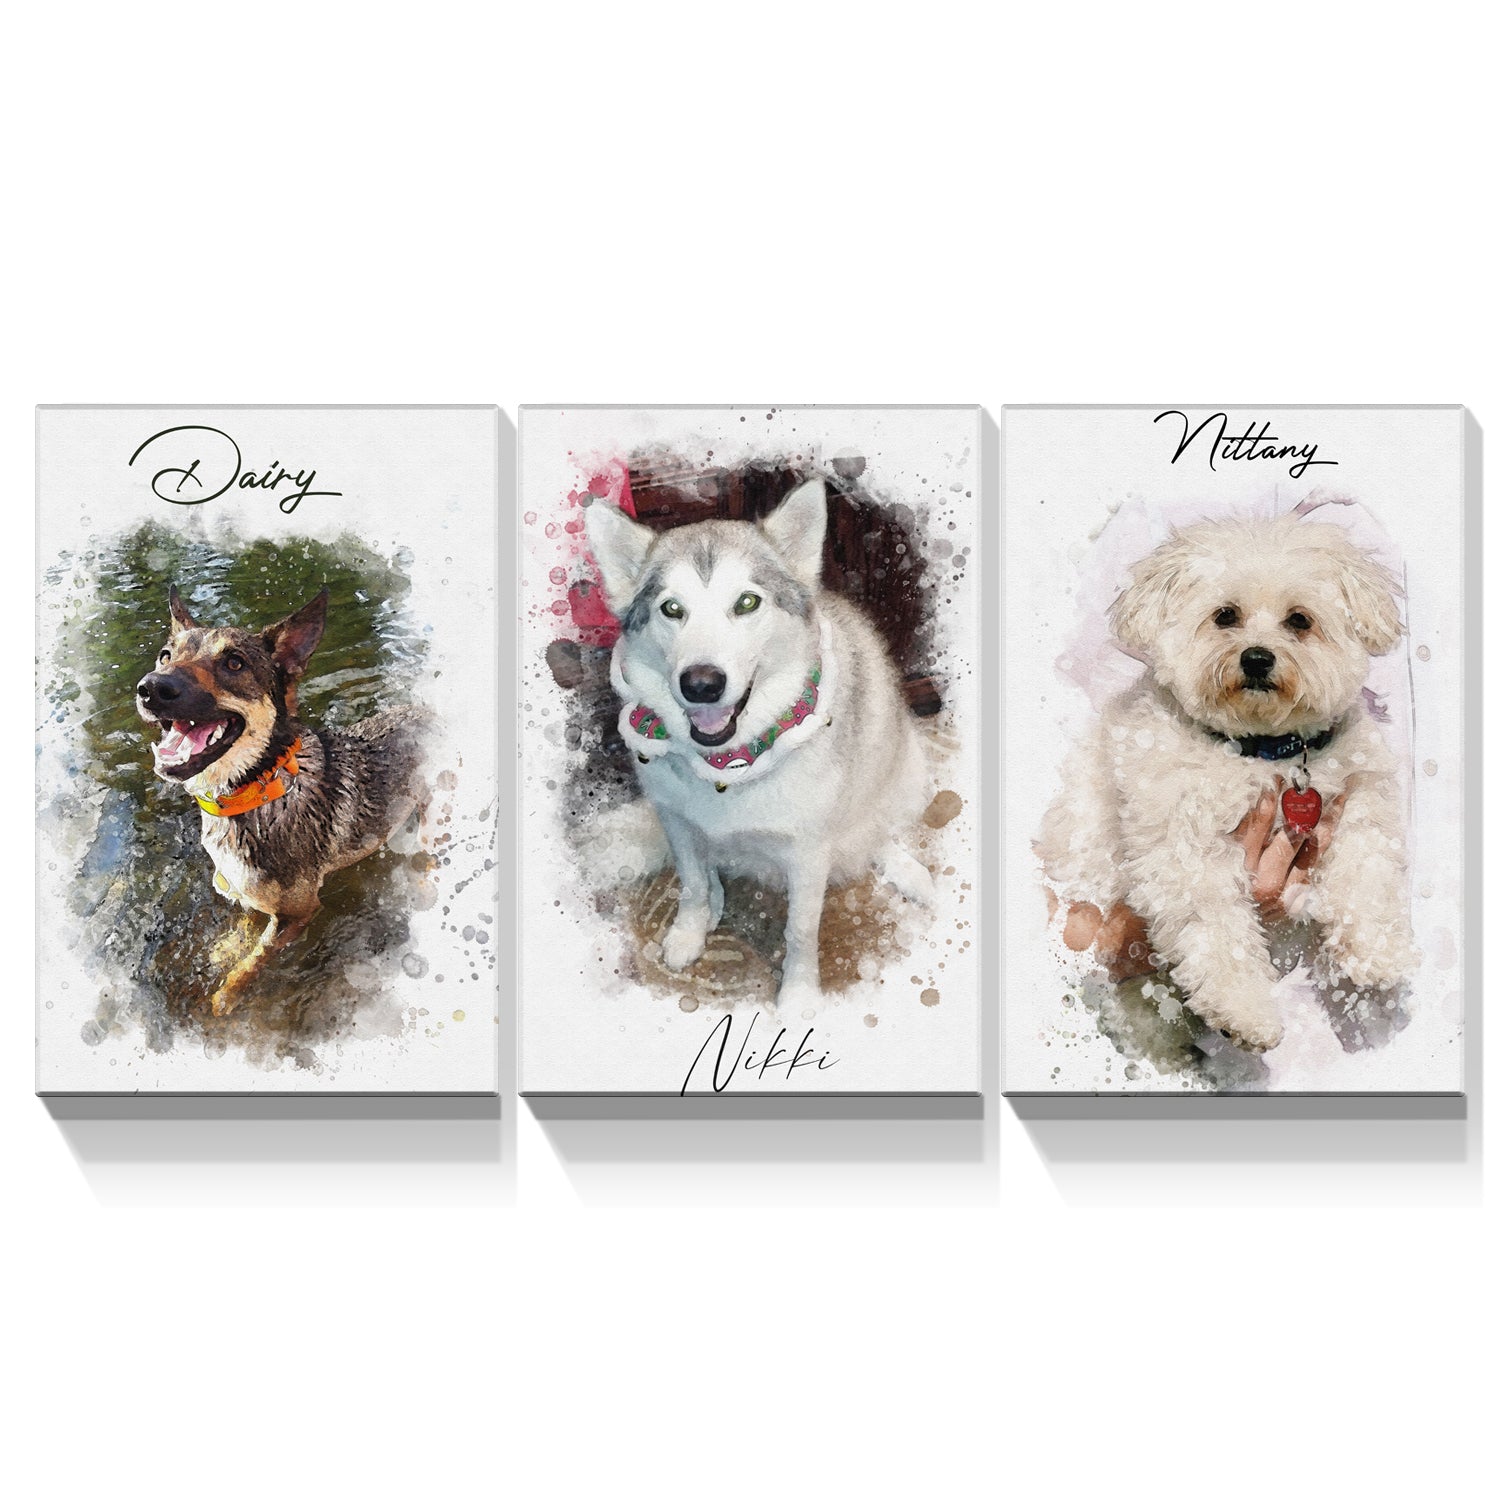 3 Panels Customize Canvas Prints with Your Photo